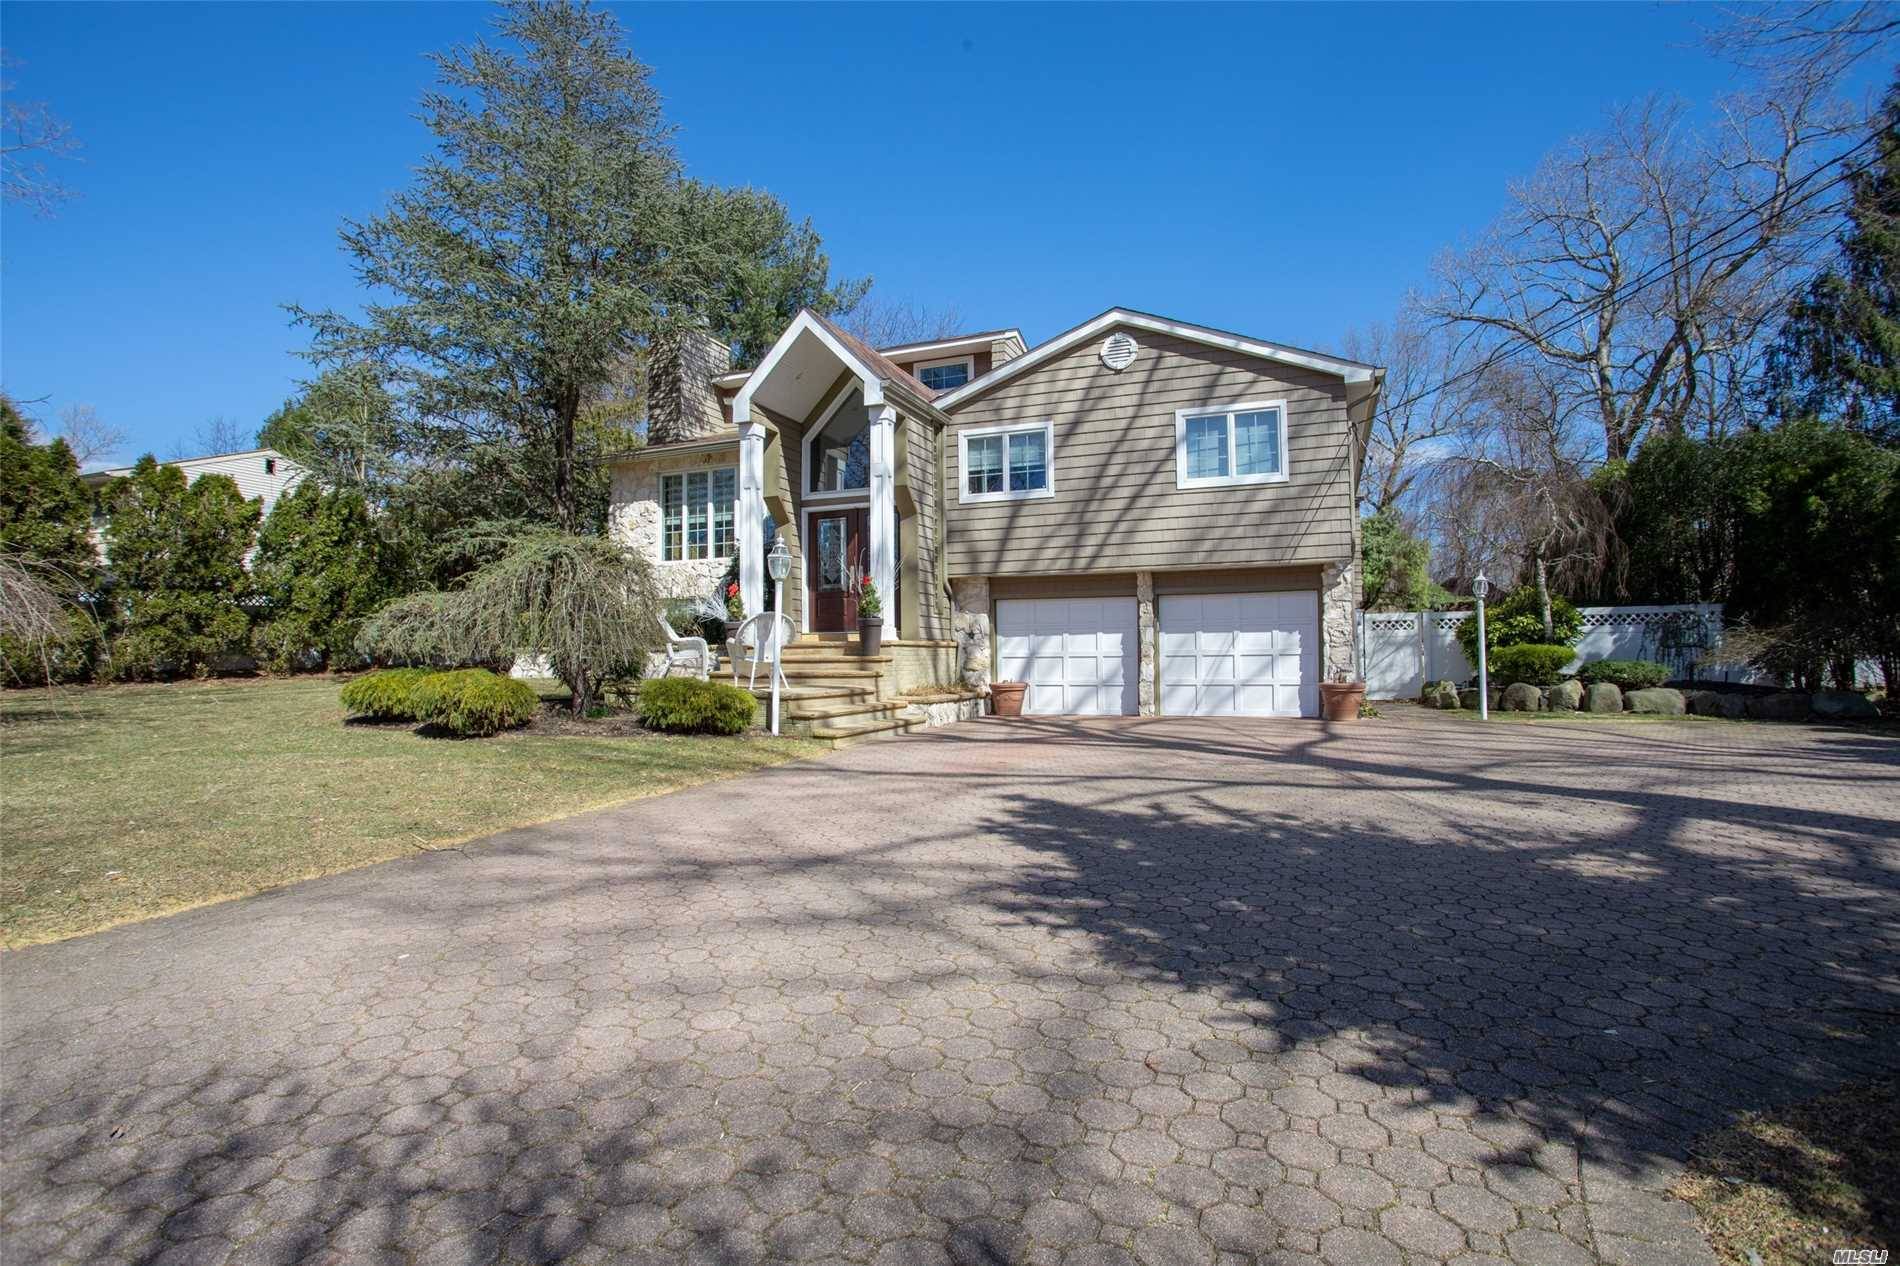 Pristine 4800 SQ FT Custom Home ; LOW TAXES With COMMACK BLUE RIBBON SCHOOLS This Home Has All The Bells and Whistles ; Gorgeous Gourmet Kitchen w Double Granite Island.